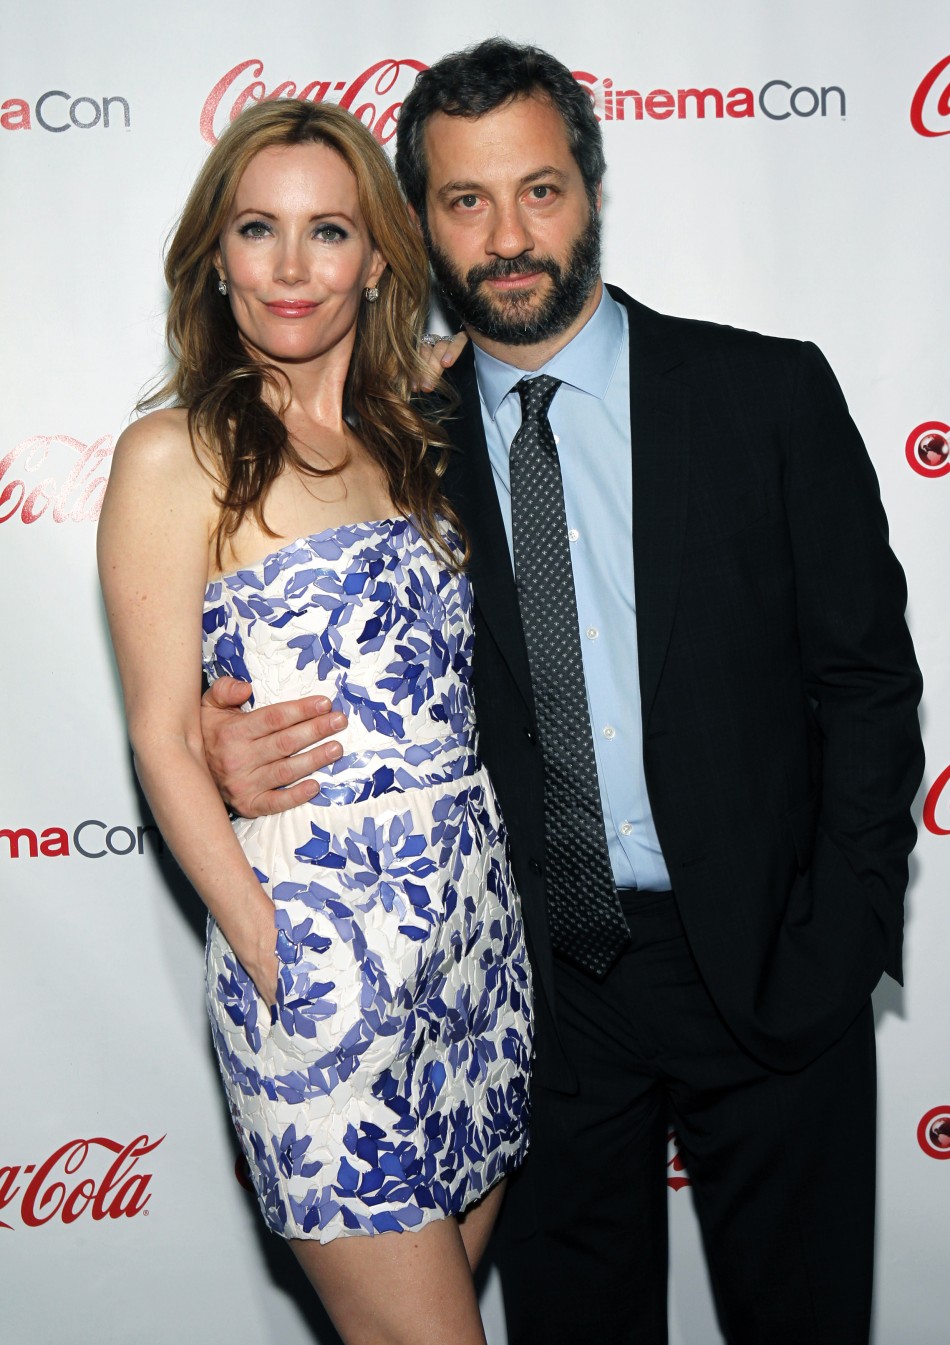 Actress Leslie Mann and her husband Judd Apatow arrive for the CinemaCon Big Screen Achievement Awards show at Caesars Palace in Las Vegas